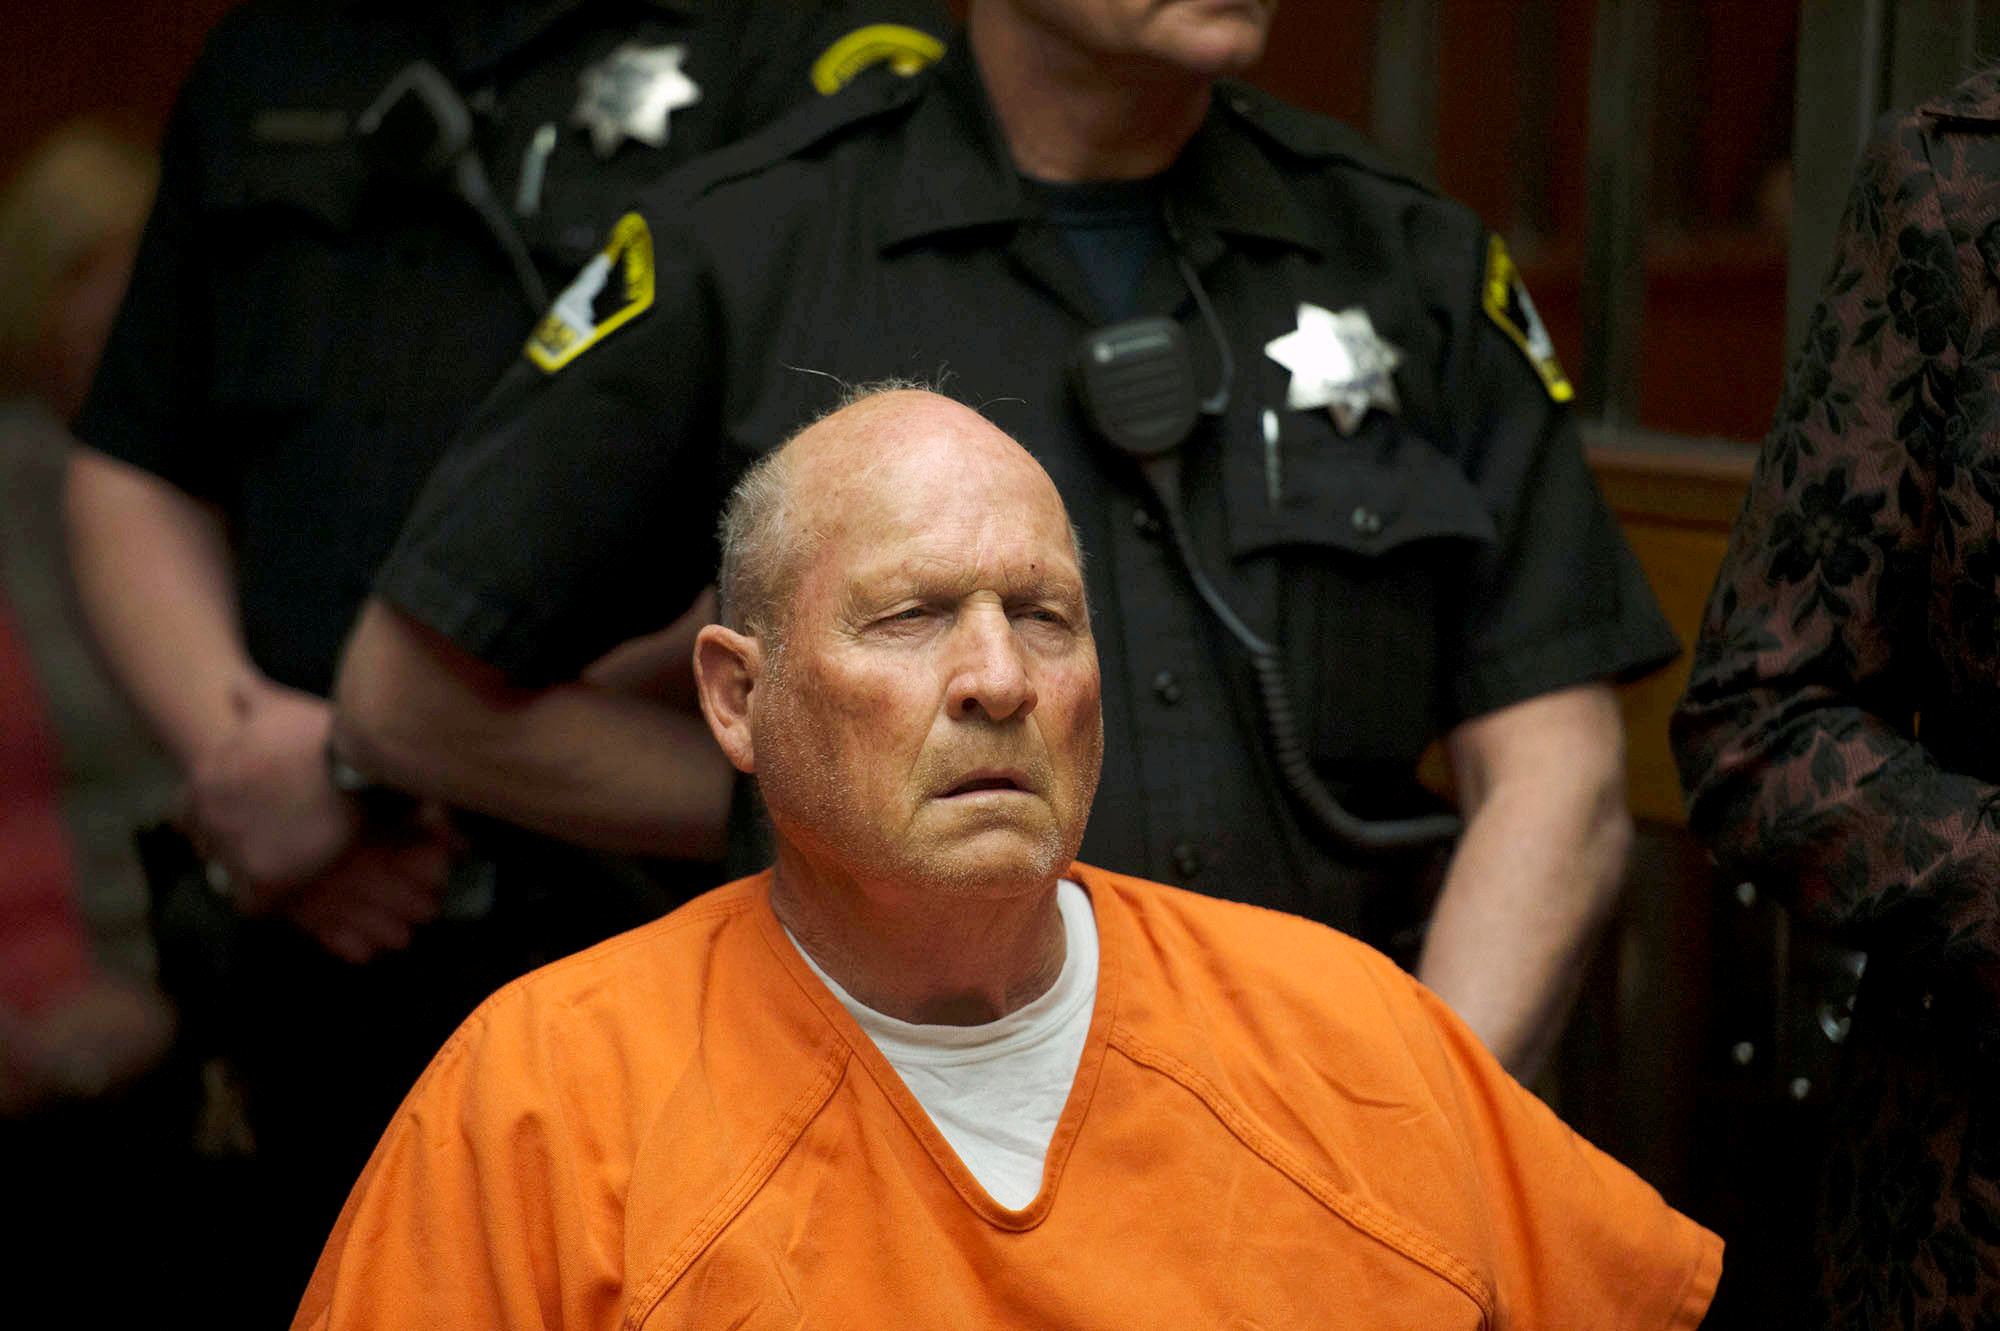 PHOTO: In this April 27, 2018, file photo, Joseph DeAngelo, 72, who authorities said was identified by DNA evidence as the the Golden State Killer, appears at his arraignment in Sacramento, Calif.